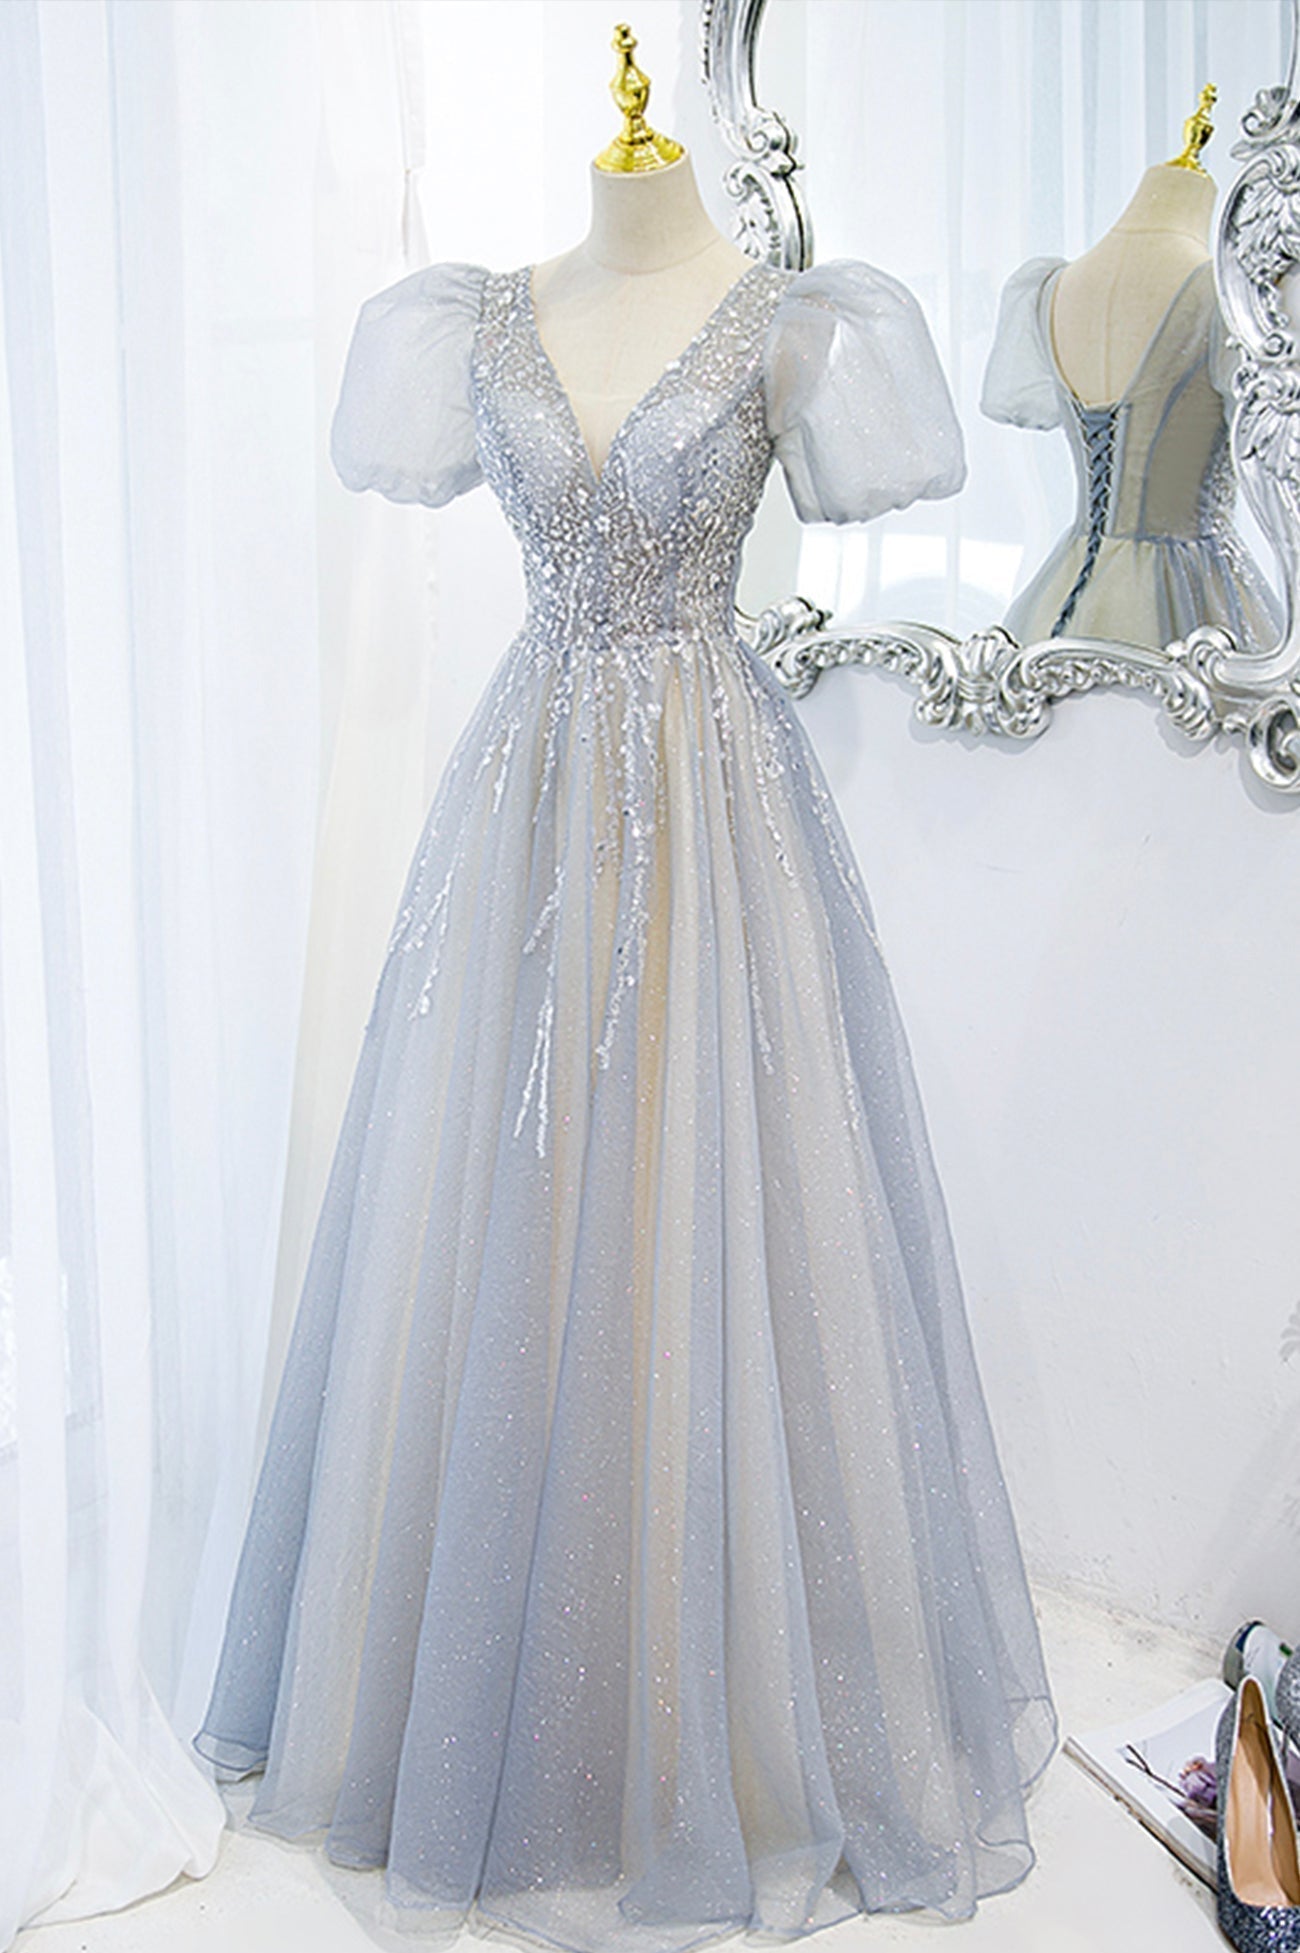 Gray Tulle Beading Long Corset Prom Dresses, A-Line Short Sleeve Corset Formal Evening Dresses outfit, Prom Dresse Long